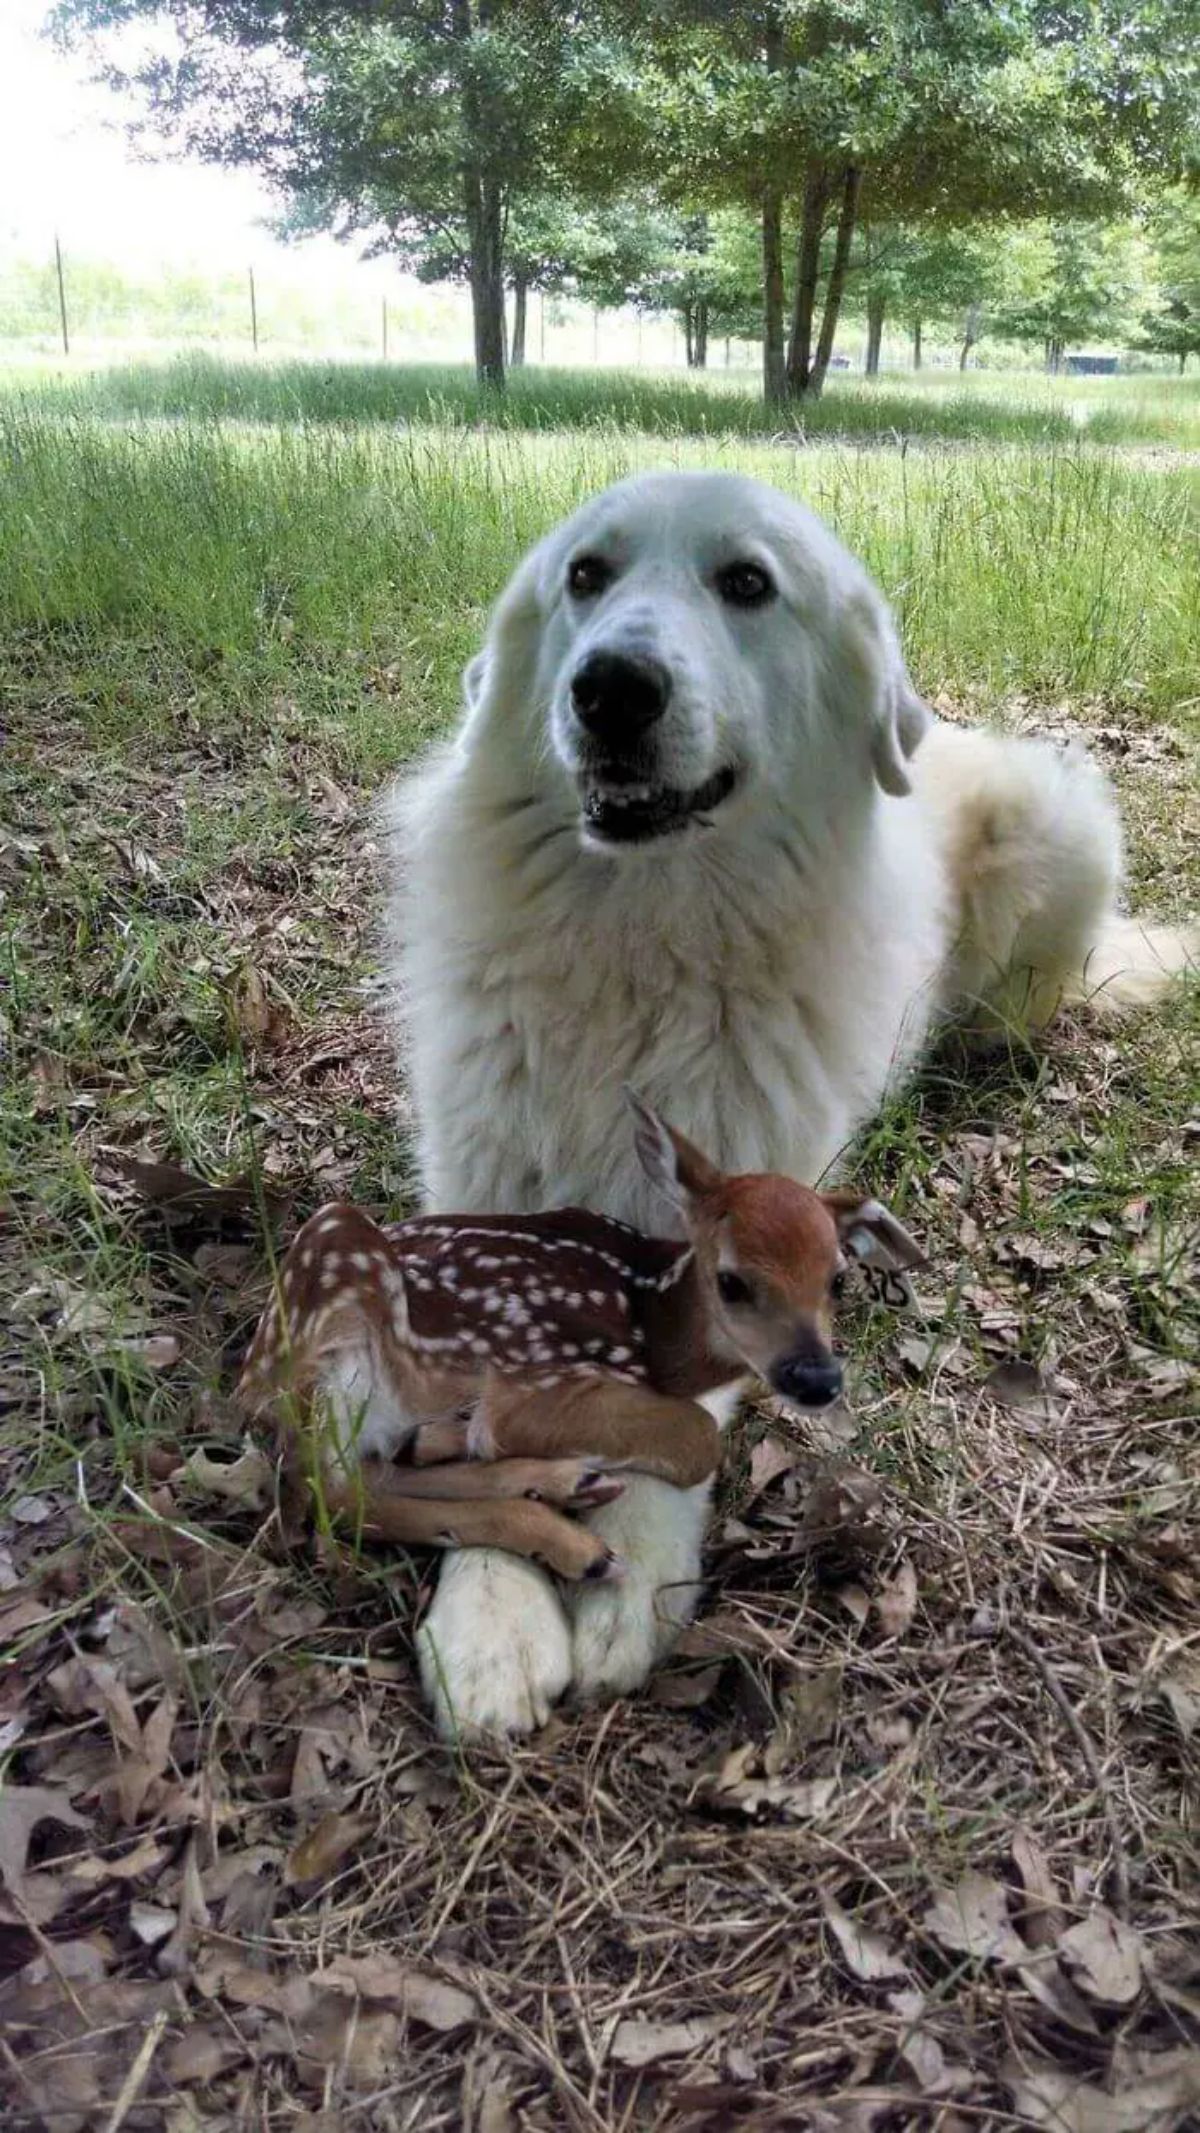 fluffy white dog laying on grass with a brown baby deer laying across the dog's outstretched paws